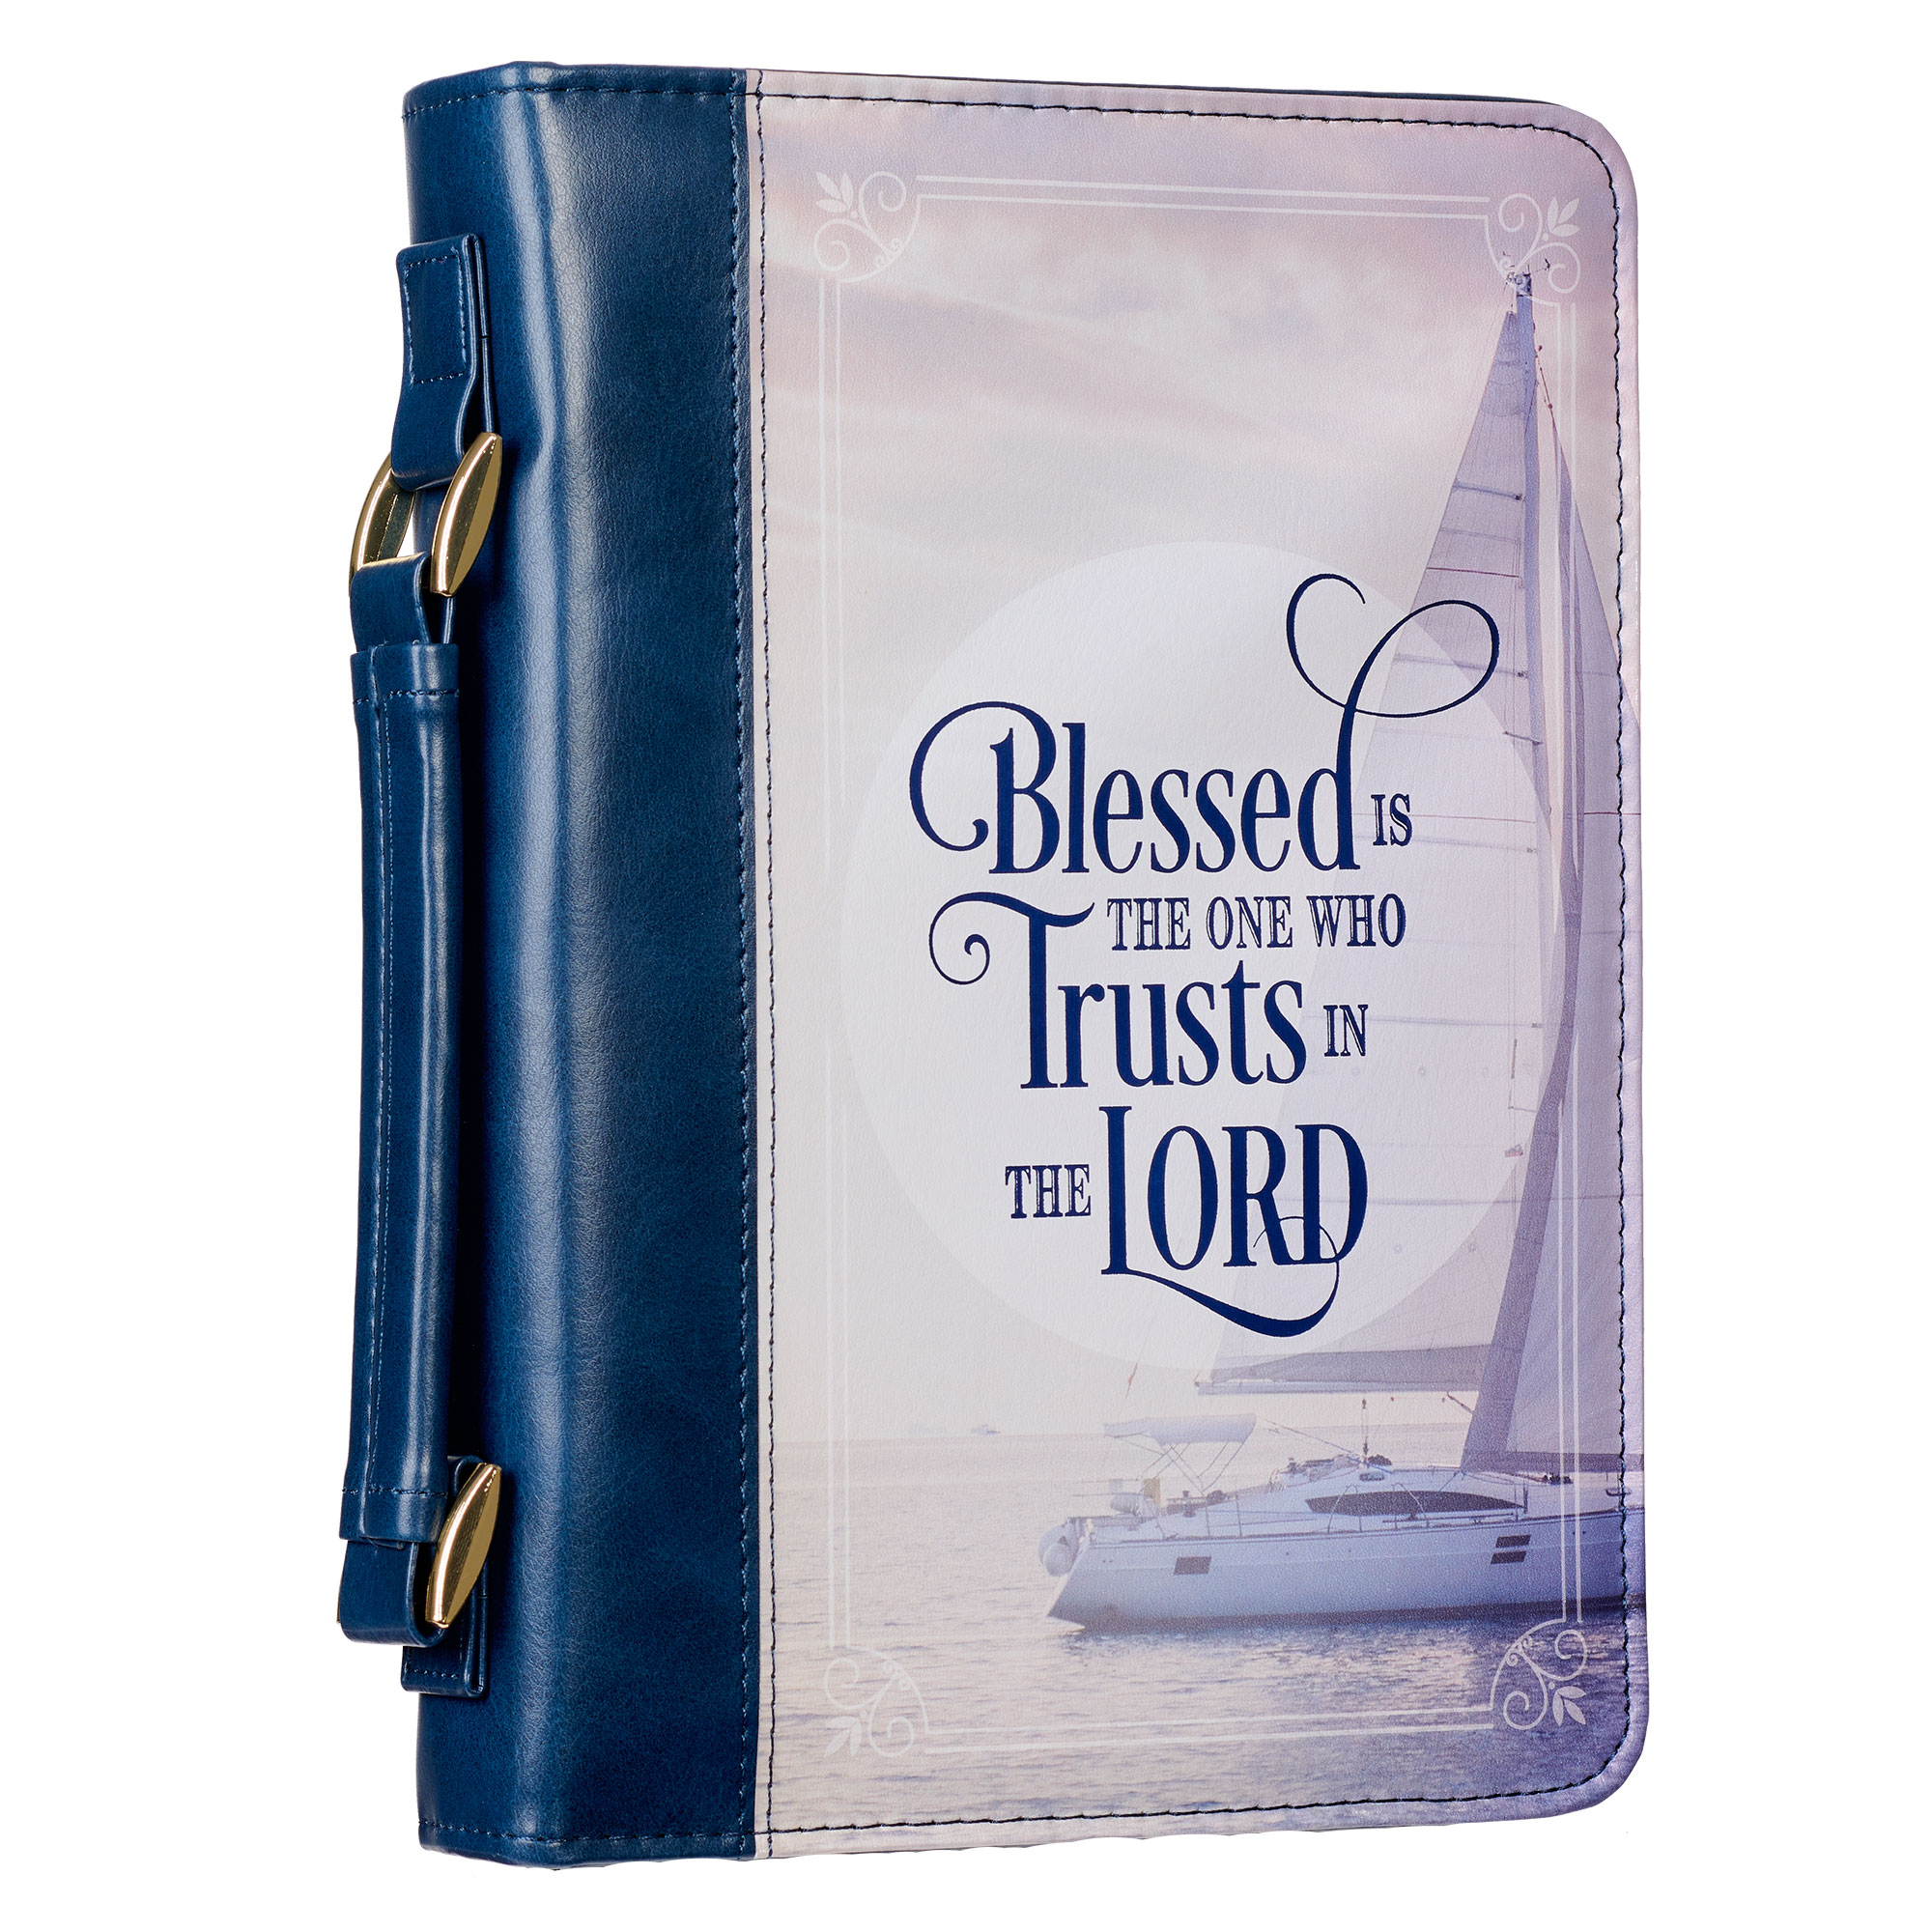 Christian Art Gifts Classic Faux Leather Bible Cover for Women: Blessed is  The One Who Trusts - Jeremiah 17:7 Inspirational Bible Verse, Creamy Beige,  Medium - Walmart.com